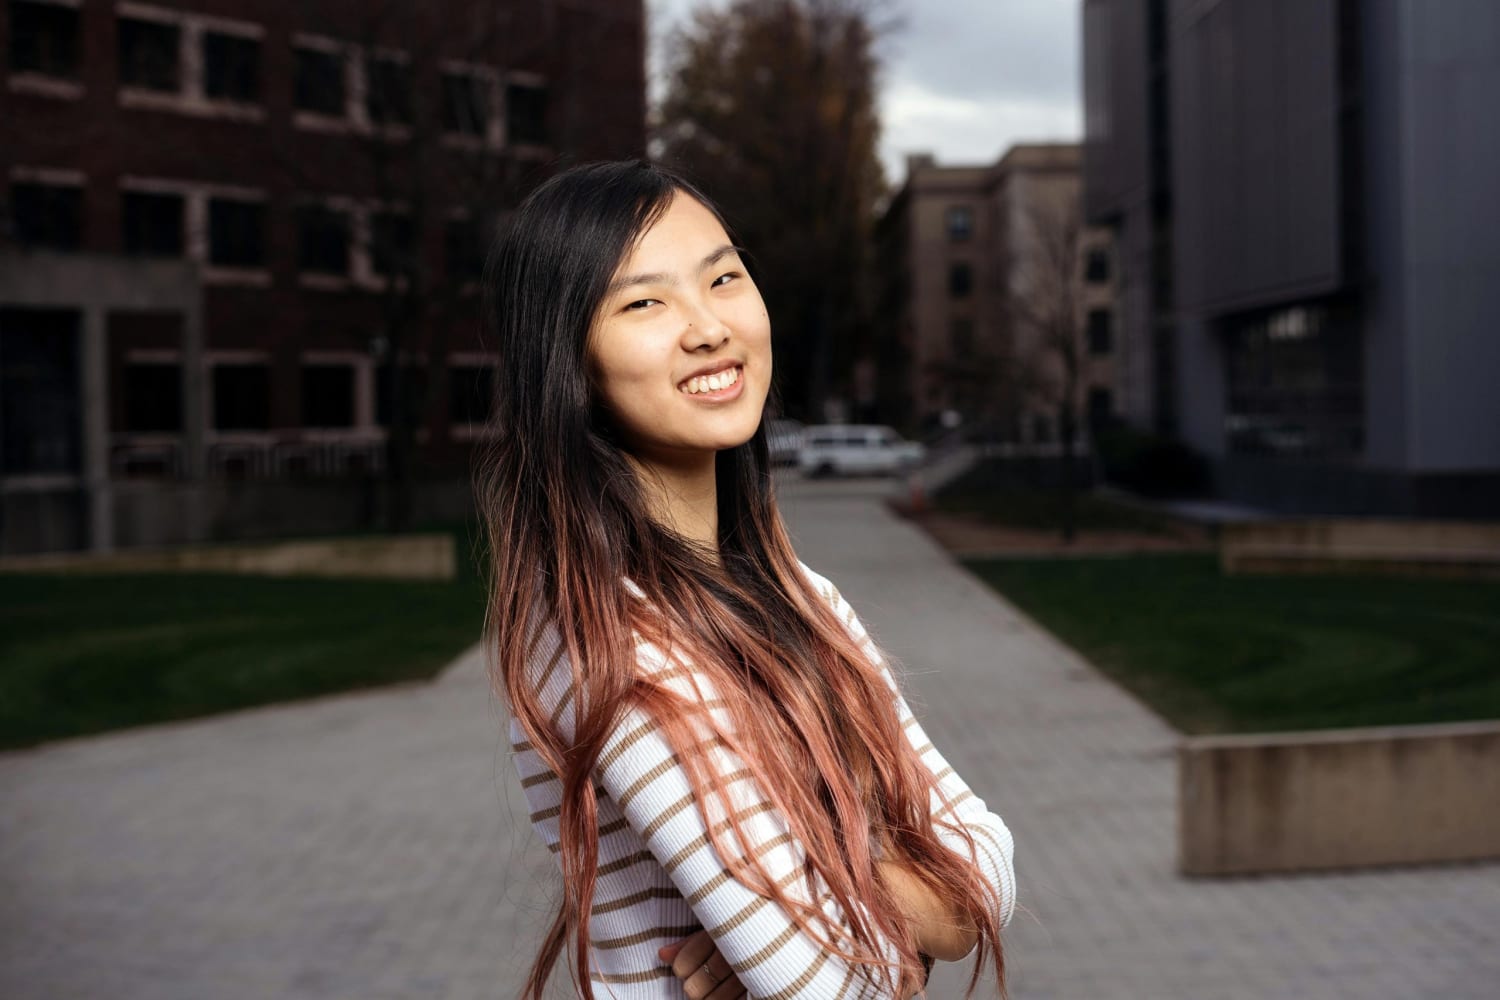 MIT Student Probing Reality Through Physics, Philosophy and Writing